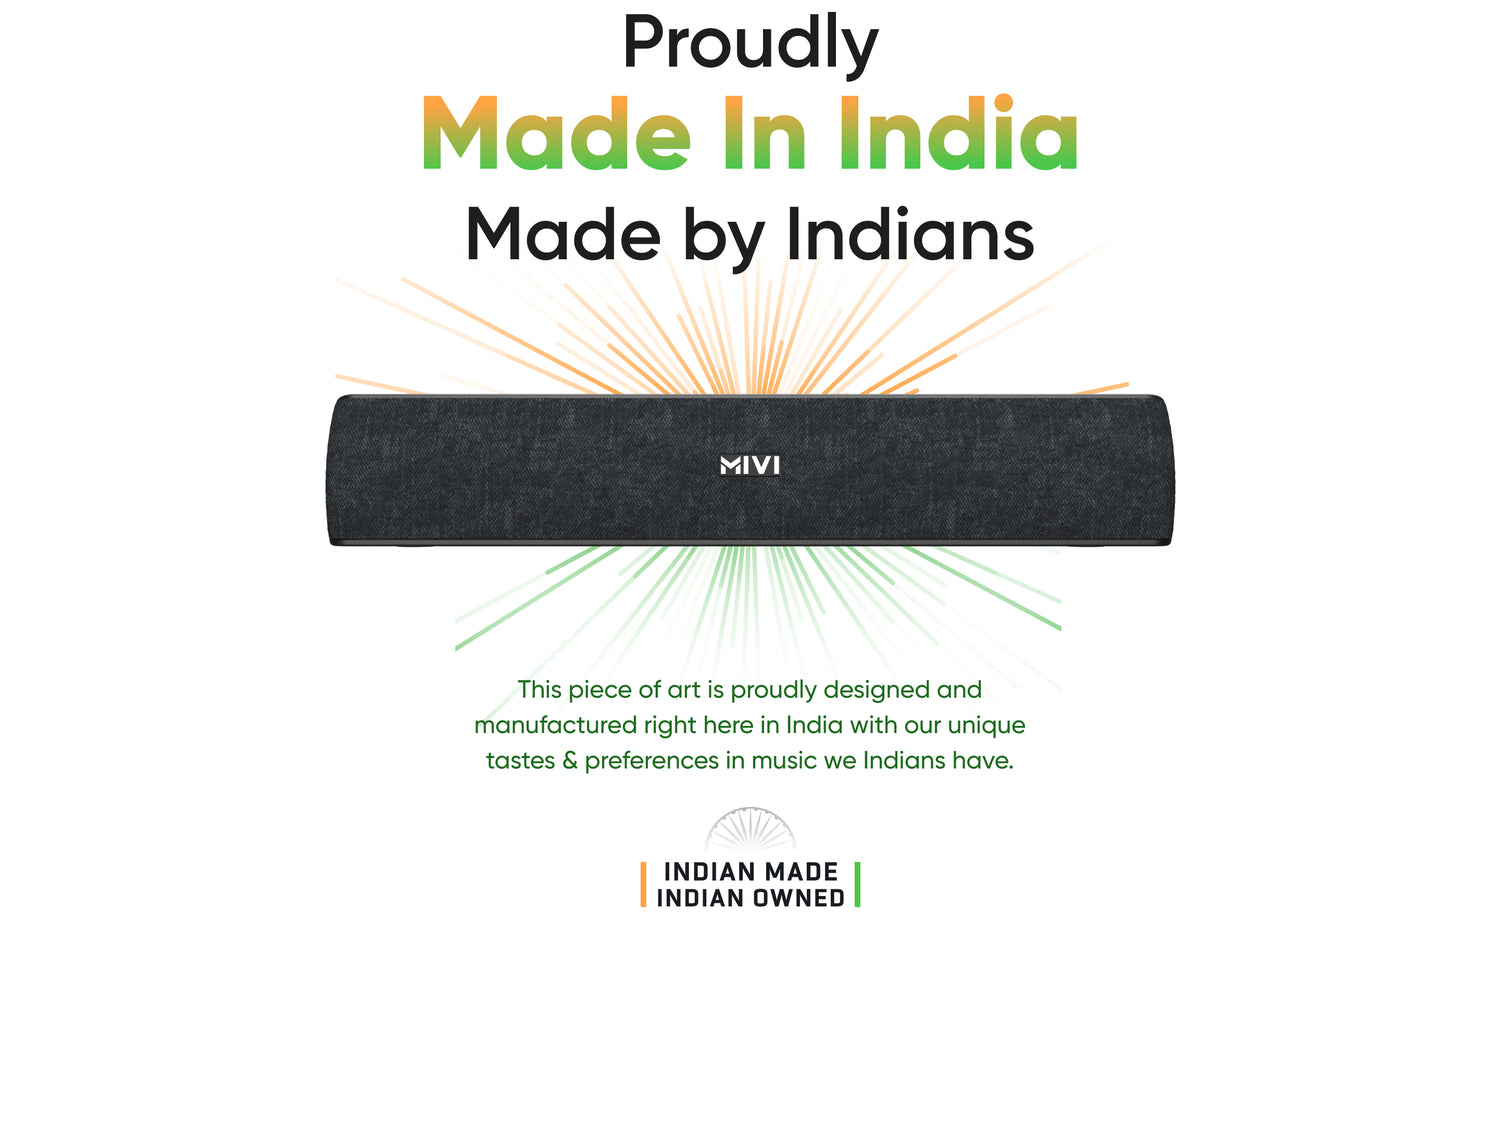 Proudly Made In India Made by Indians This piece of art is proudly designed and manufactured right here in India with our unique tastes & preferences in music we Indians have. INDIAN MADEINDIAN OWNED